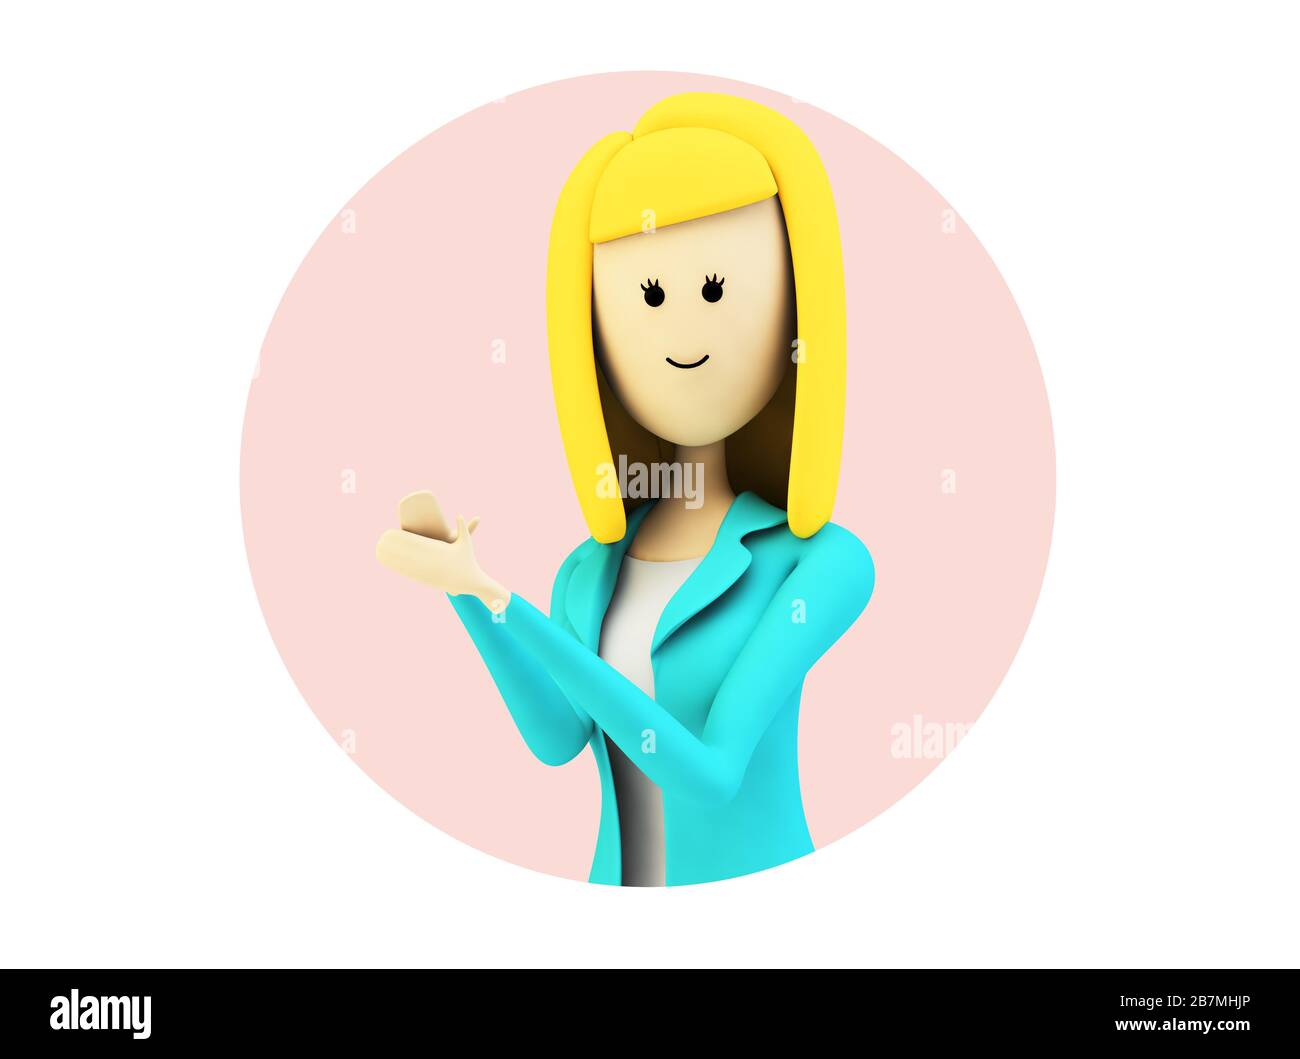 character washiong hands 3d rendering isolated Stock Photo